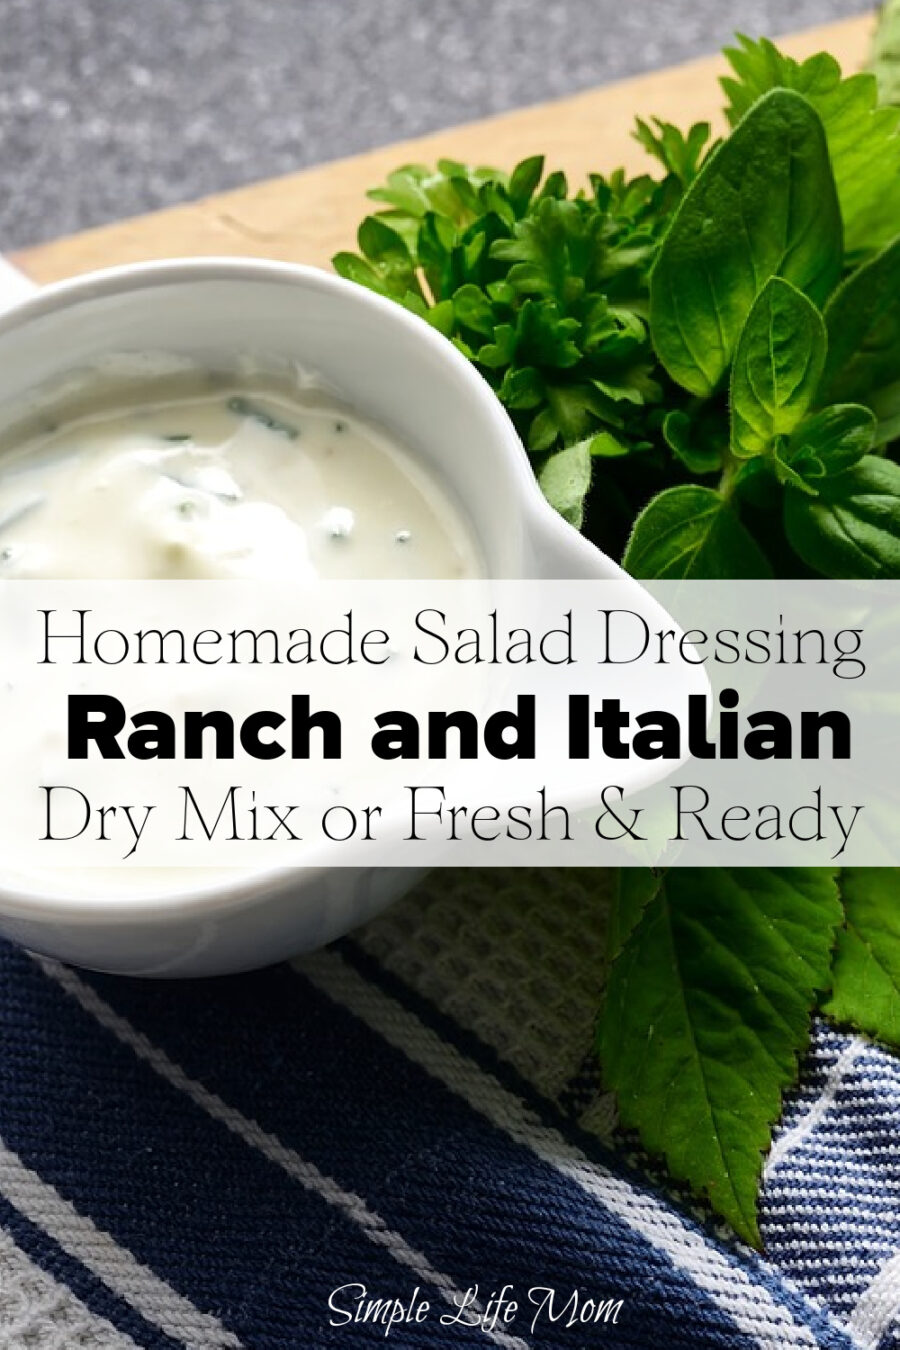 Homemade Salad Dressings Ranch and Italian Dry Mix or Ready